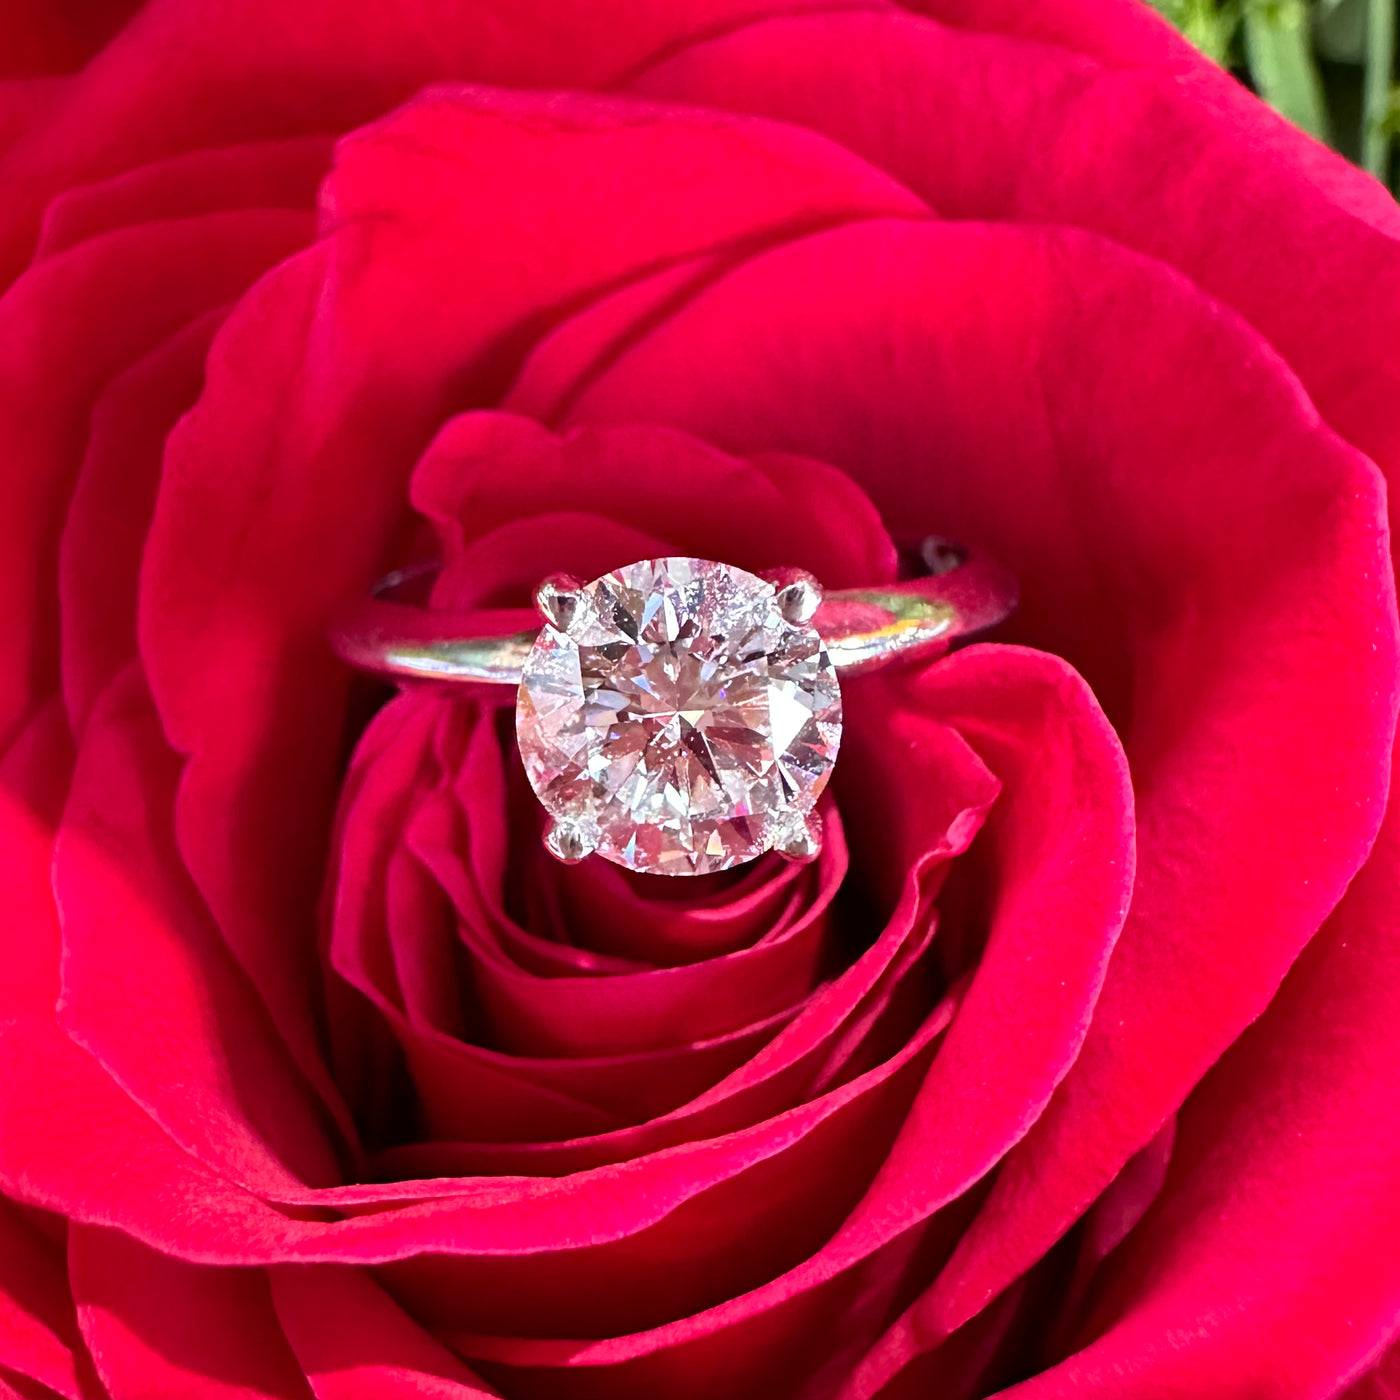 Apparel & Accessories > Jewelry > Rings 1.06 Carat Diamond Solitaire 14K White Gold Engagement Ring Pierce Custom Jewelers